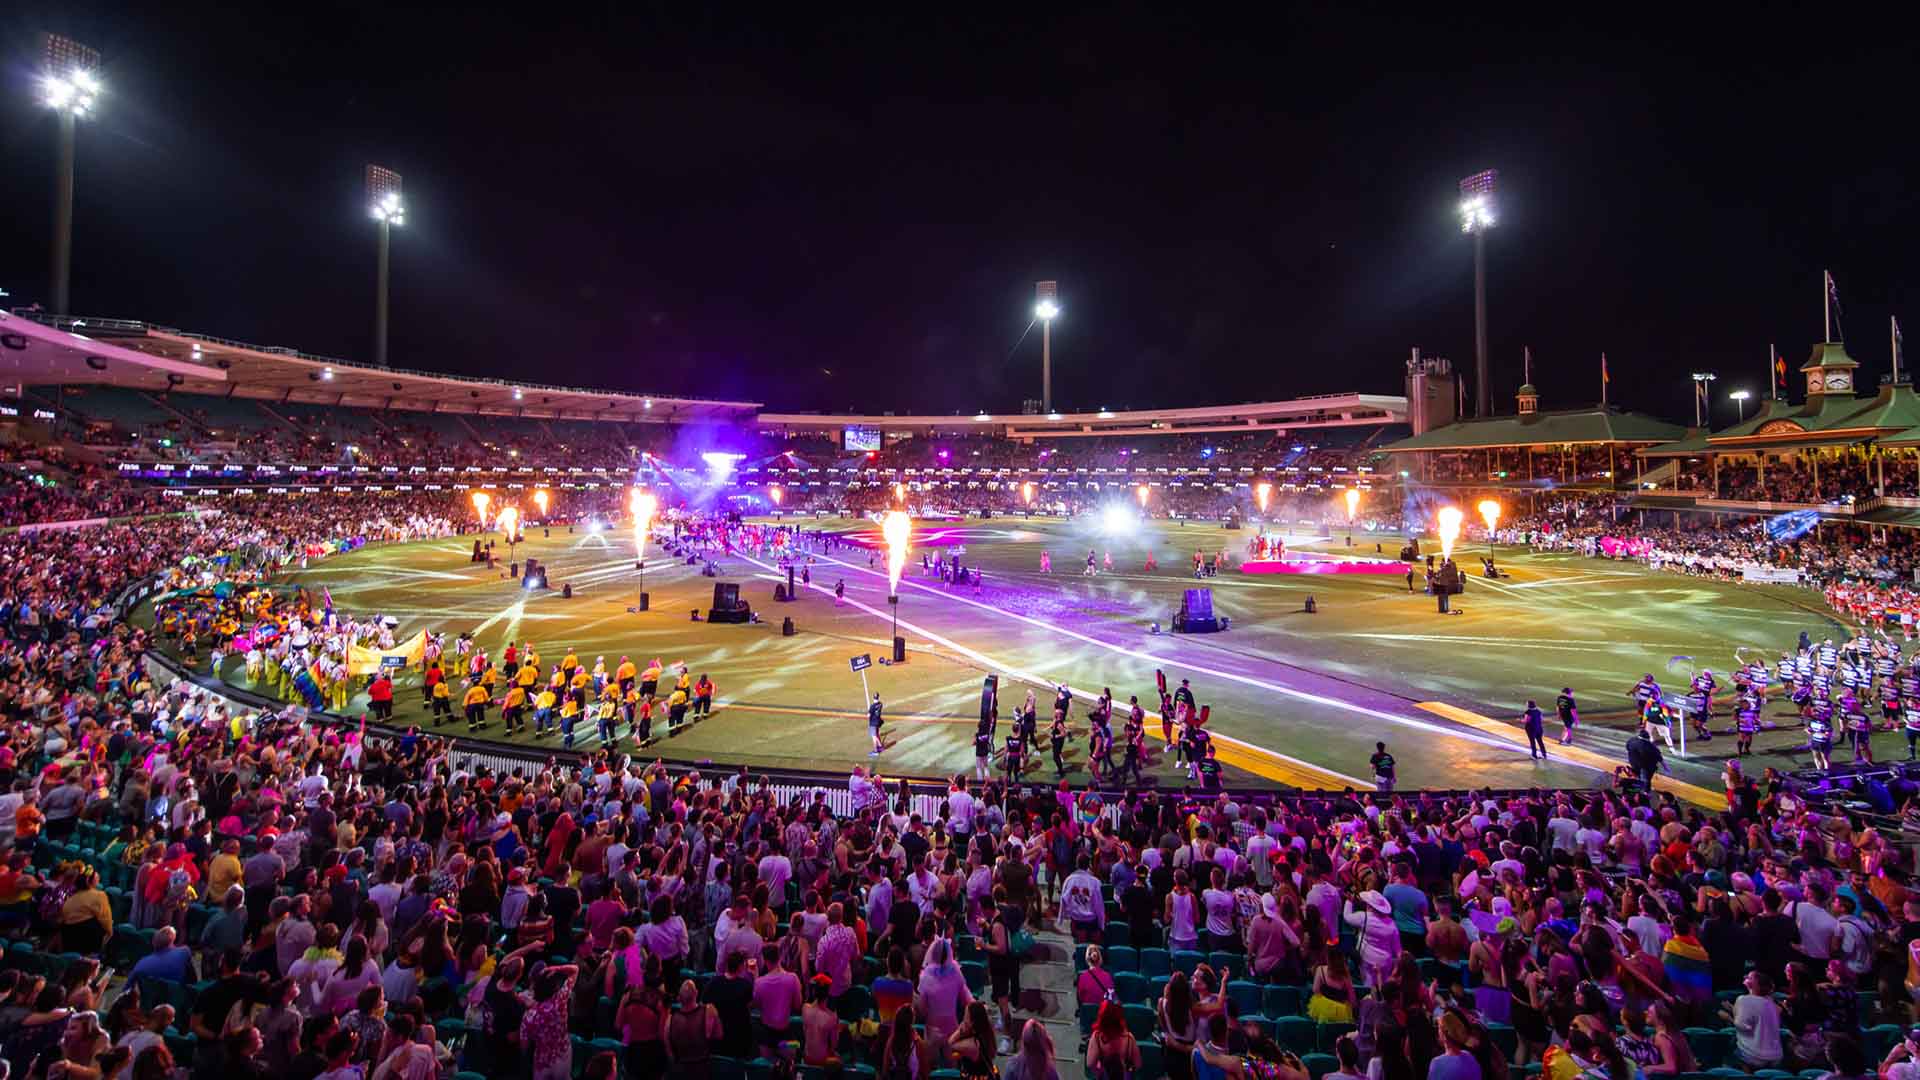 The Sydney Gay and Lesbian Mardi Gras Parade Will Be Held at the SCG Again in 2022